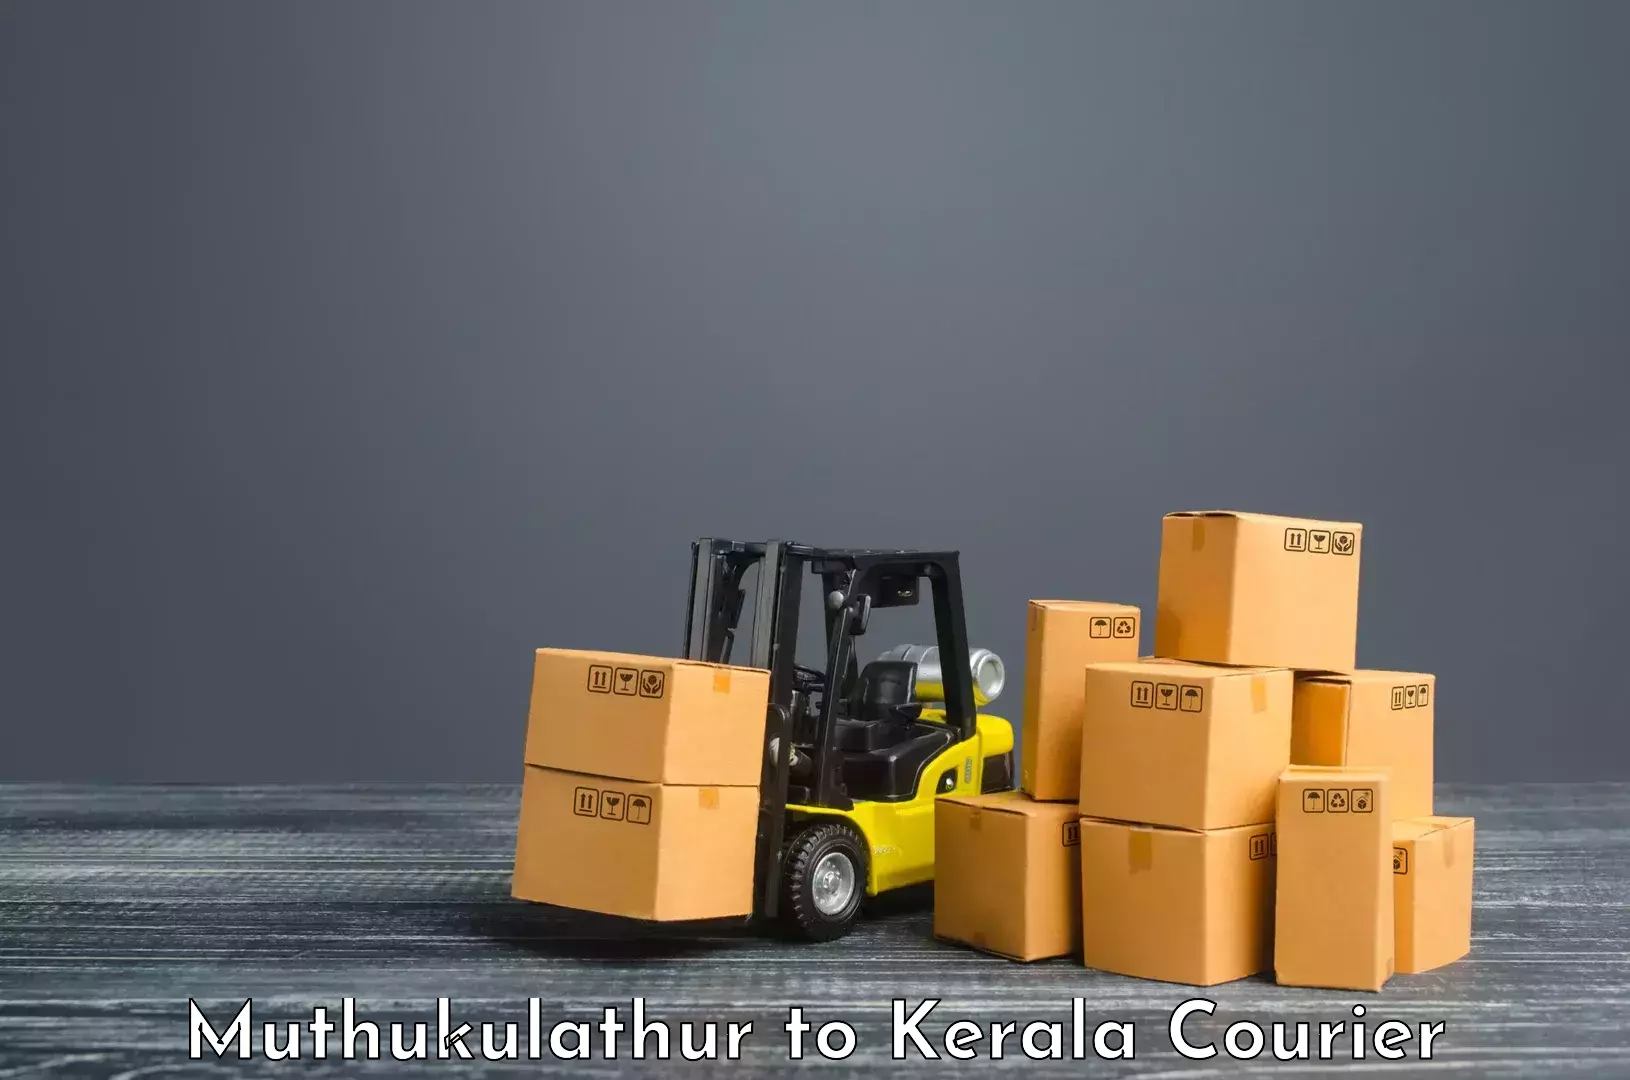 Cost-effective shipping solutions in Muthukulathur to Kollam